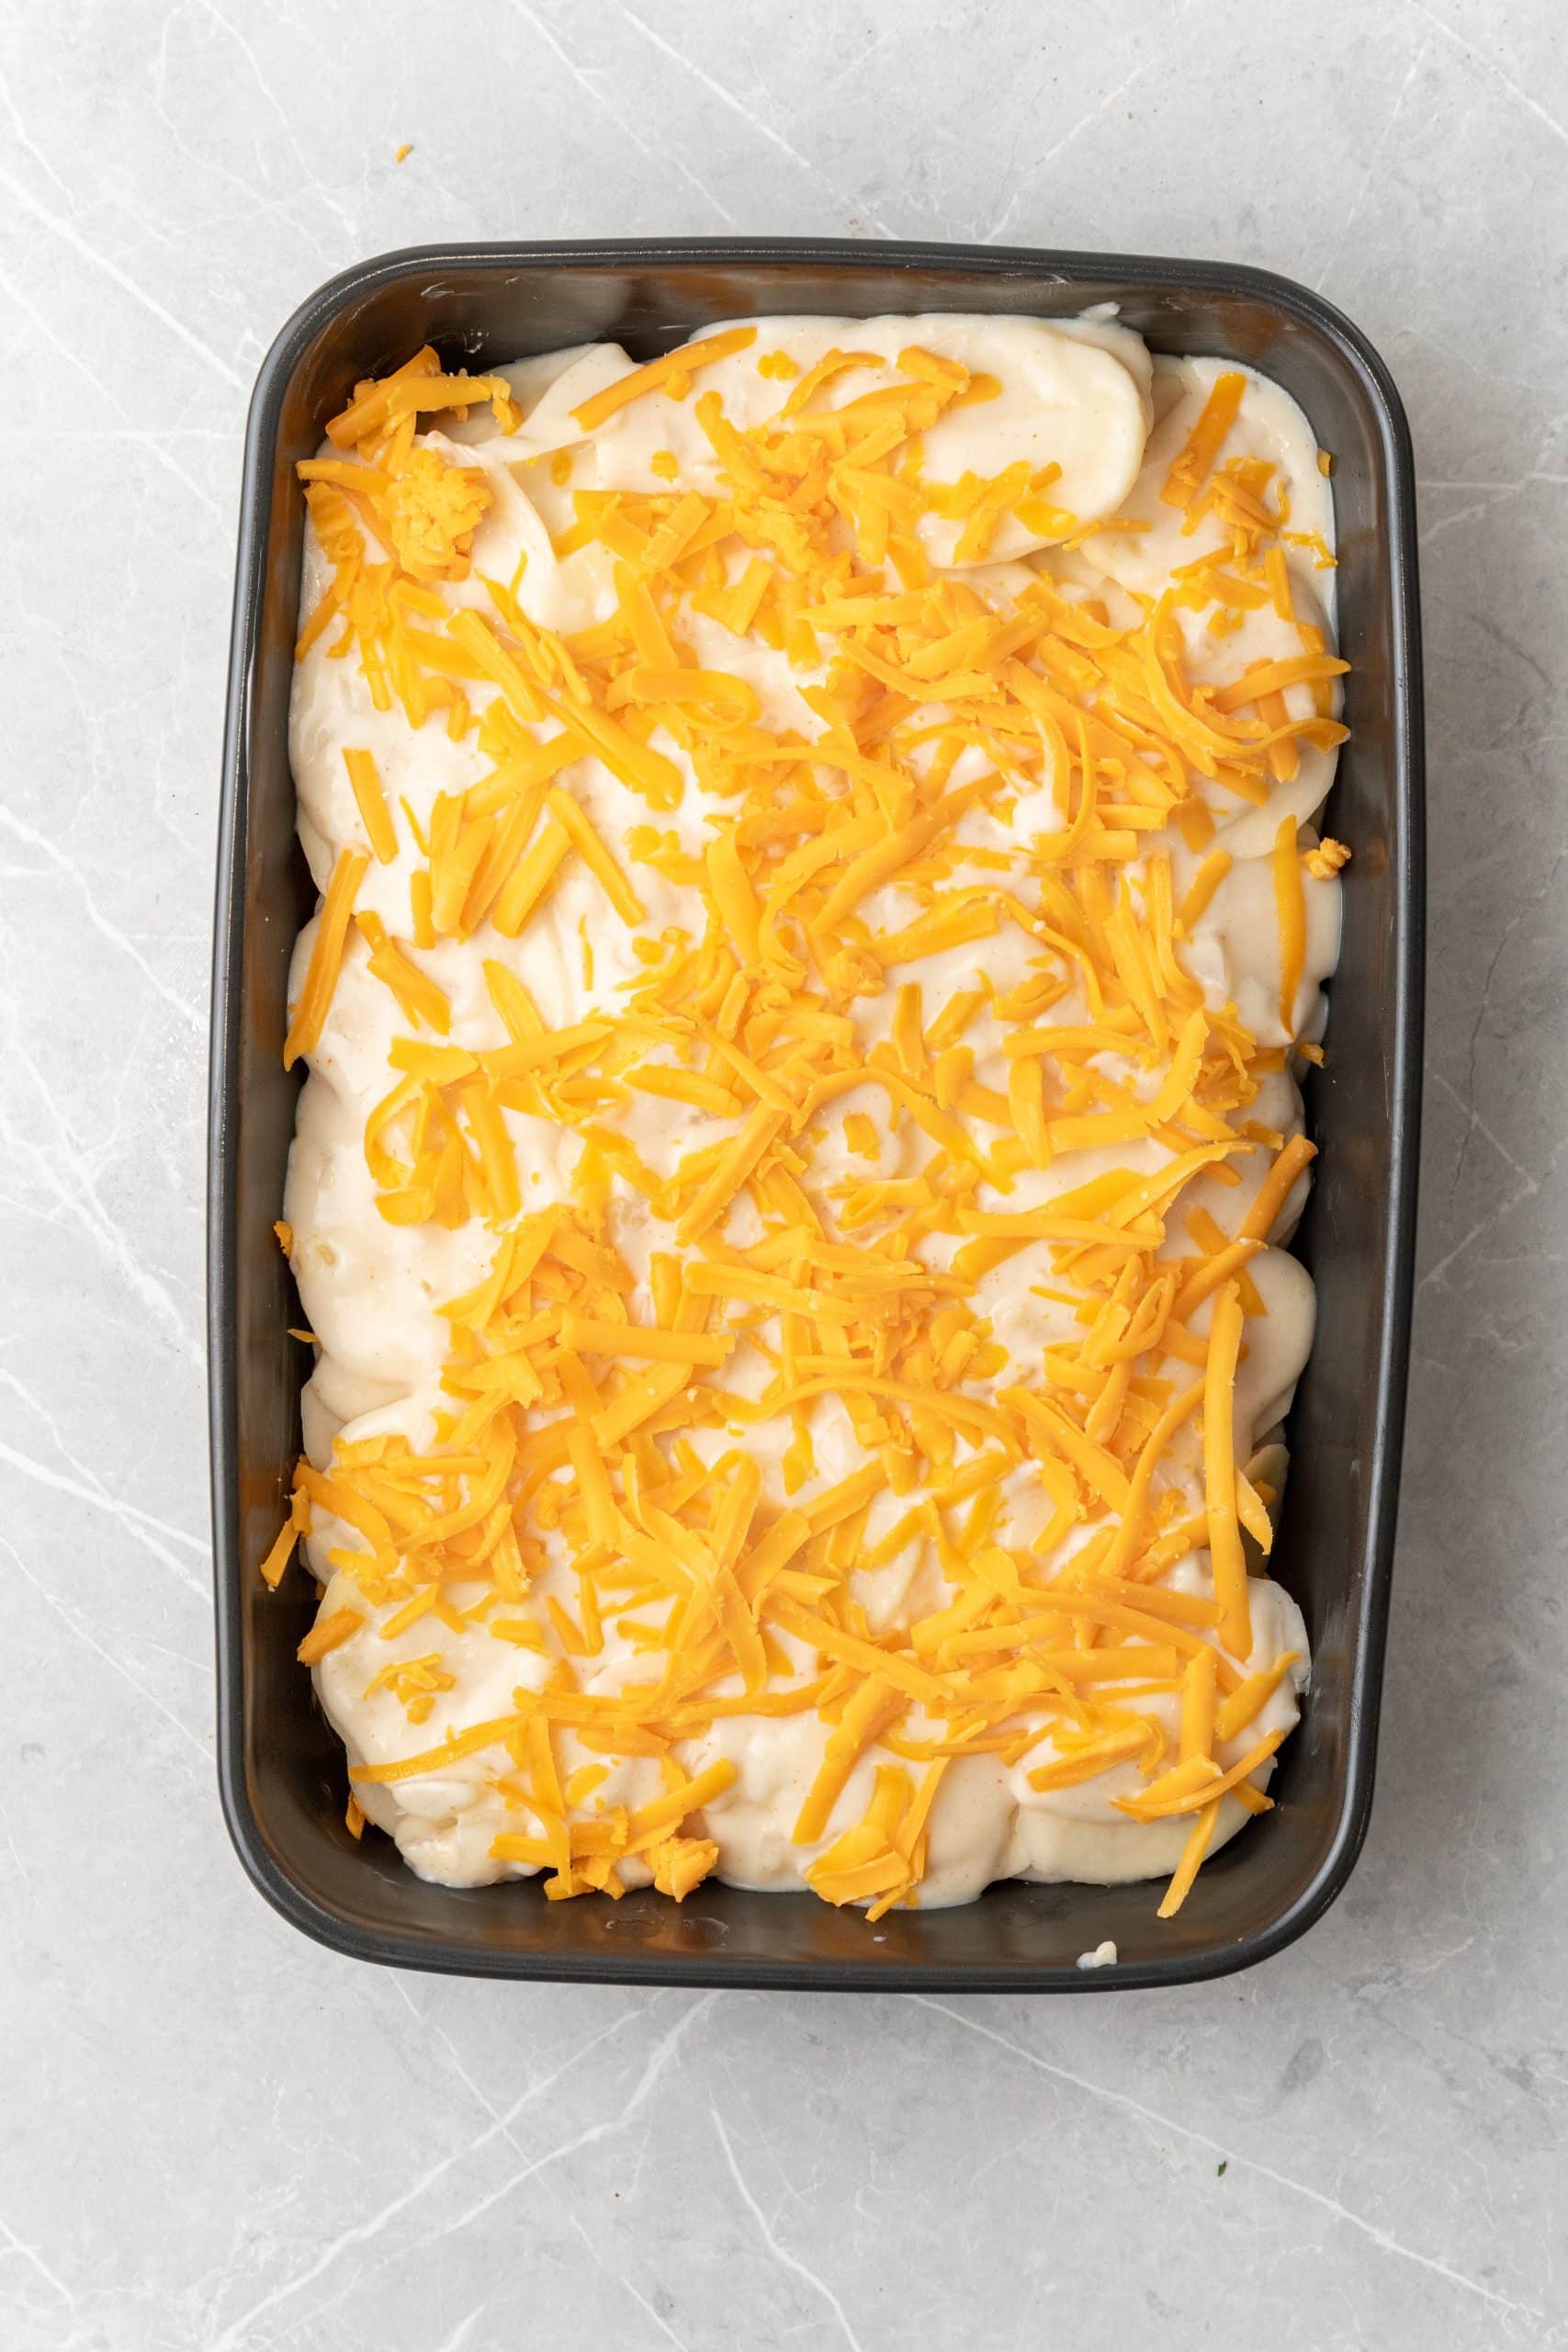 shredded cheddar cheese on top of a creamy potato casserole in a black baking dish